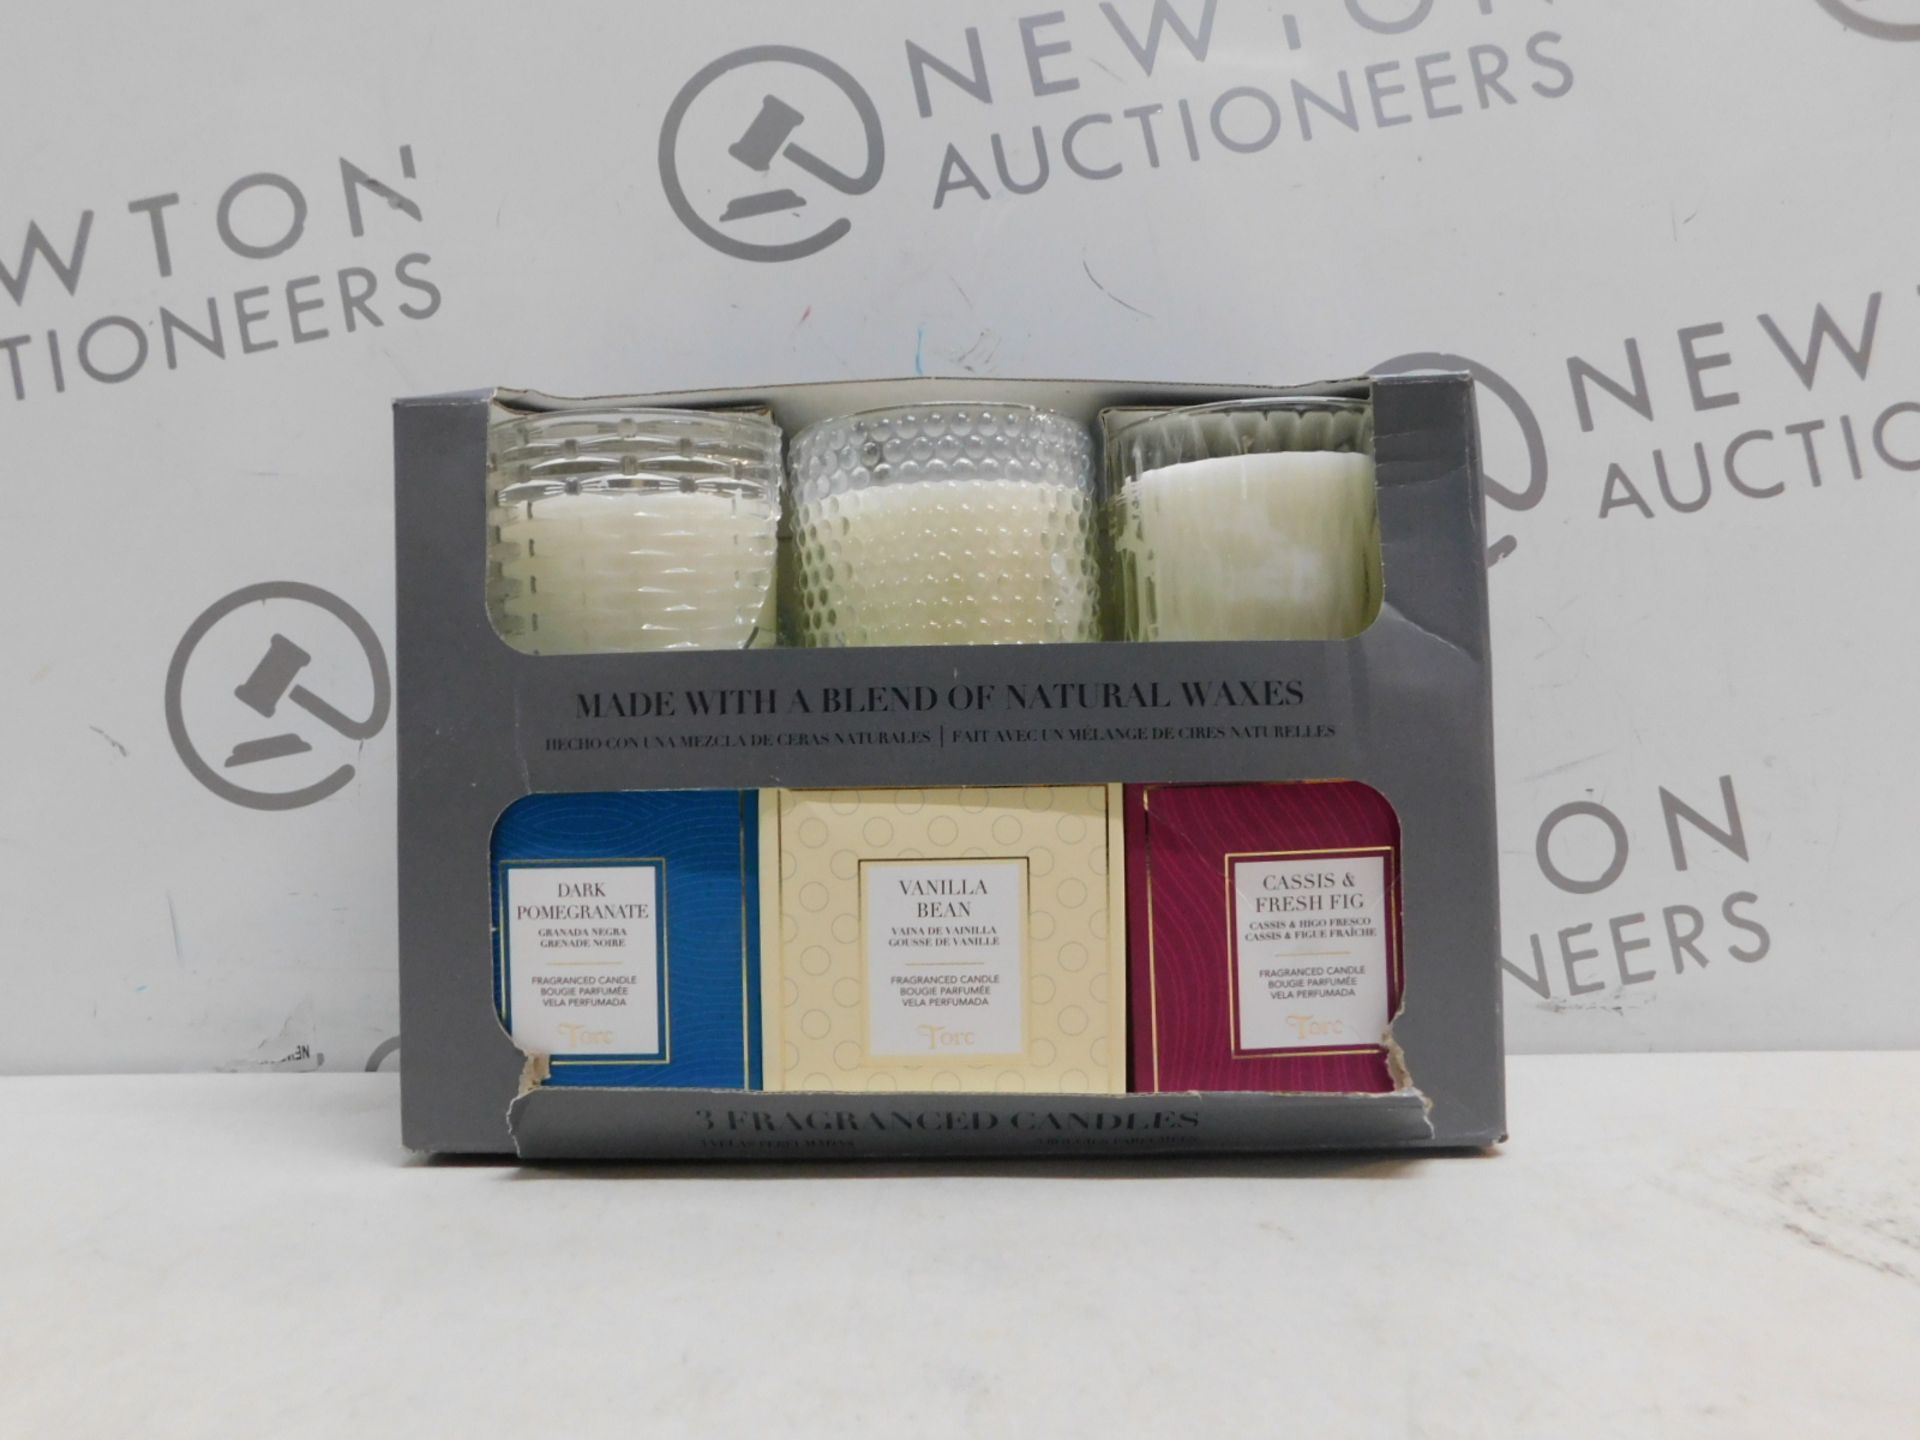 1 BOXED SET OF 3 TORC VARIETY FRAGRANCED CANDLES WITH GIFT BOXES RRP Â£39.99 (1 GLASS JAR BROKEN)